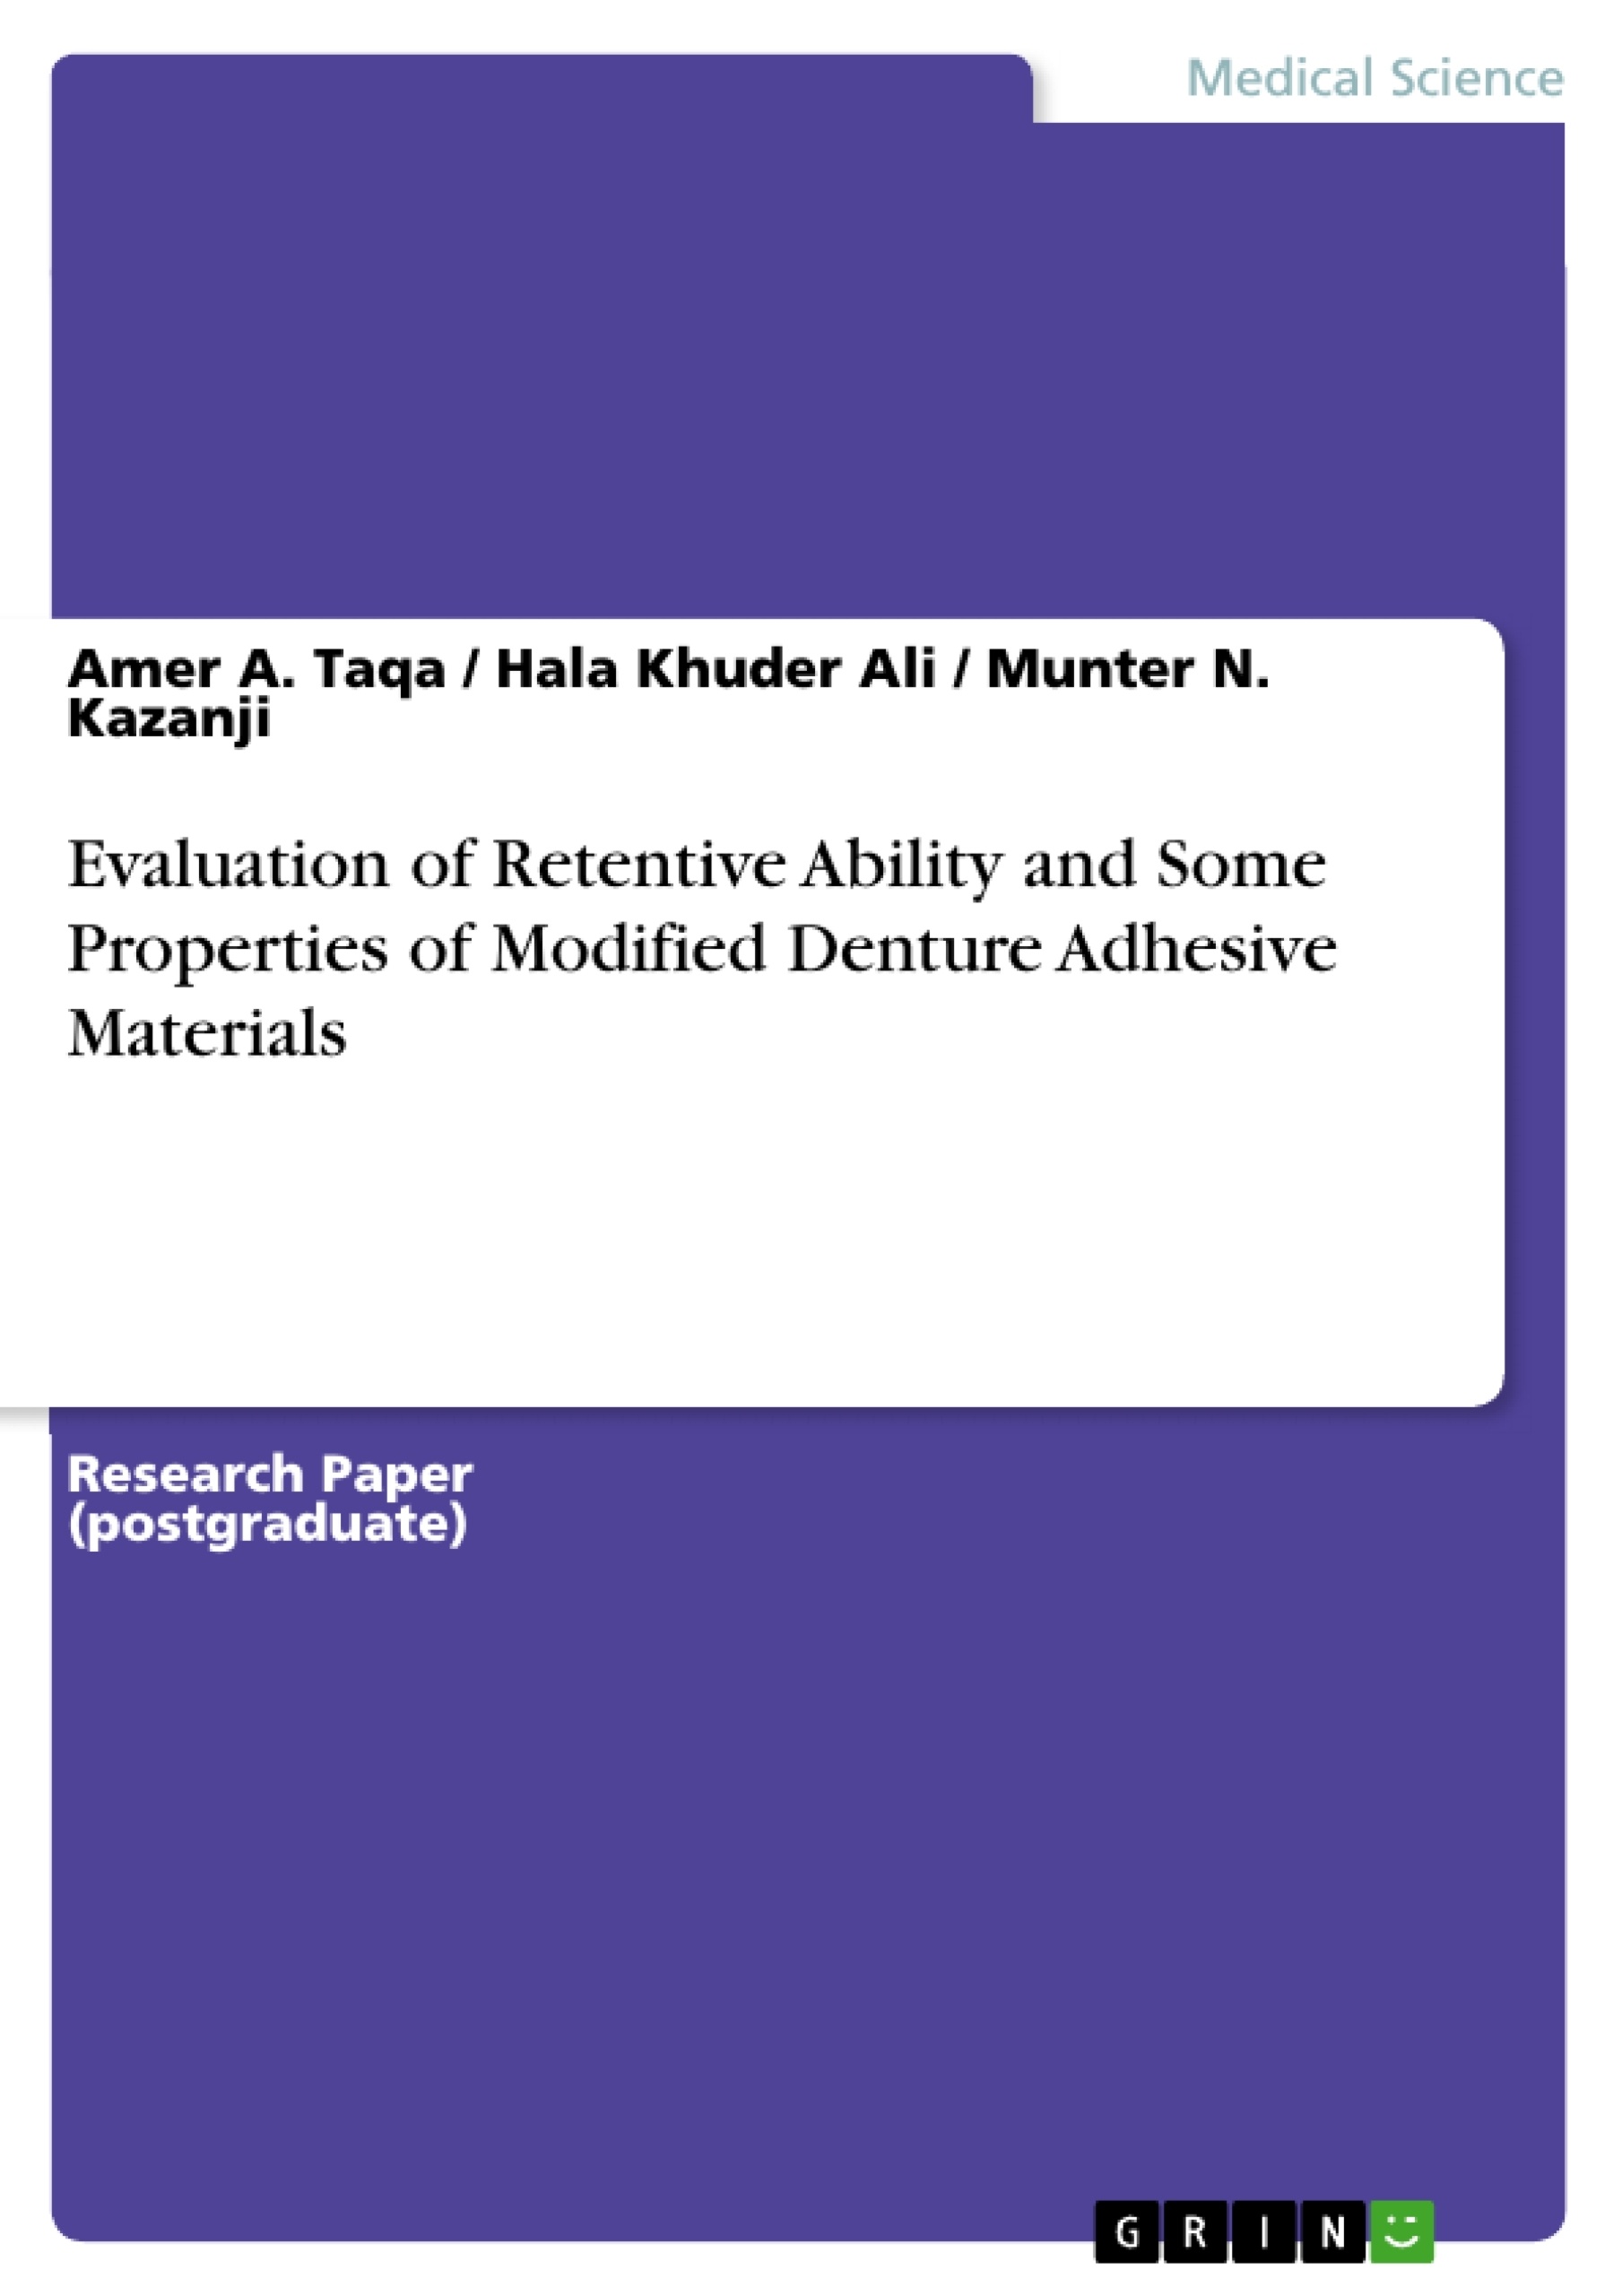 Titre: Evaluation of Retentive Ability and Some Properties of Modified Denture Adhesive Materials